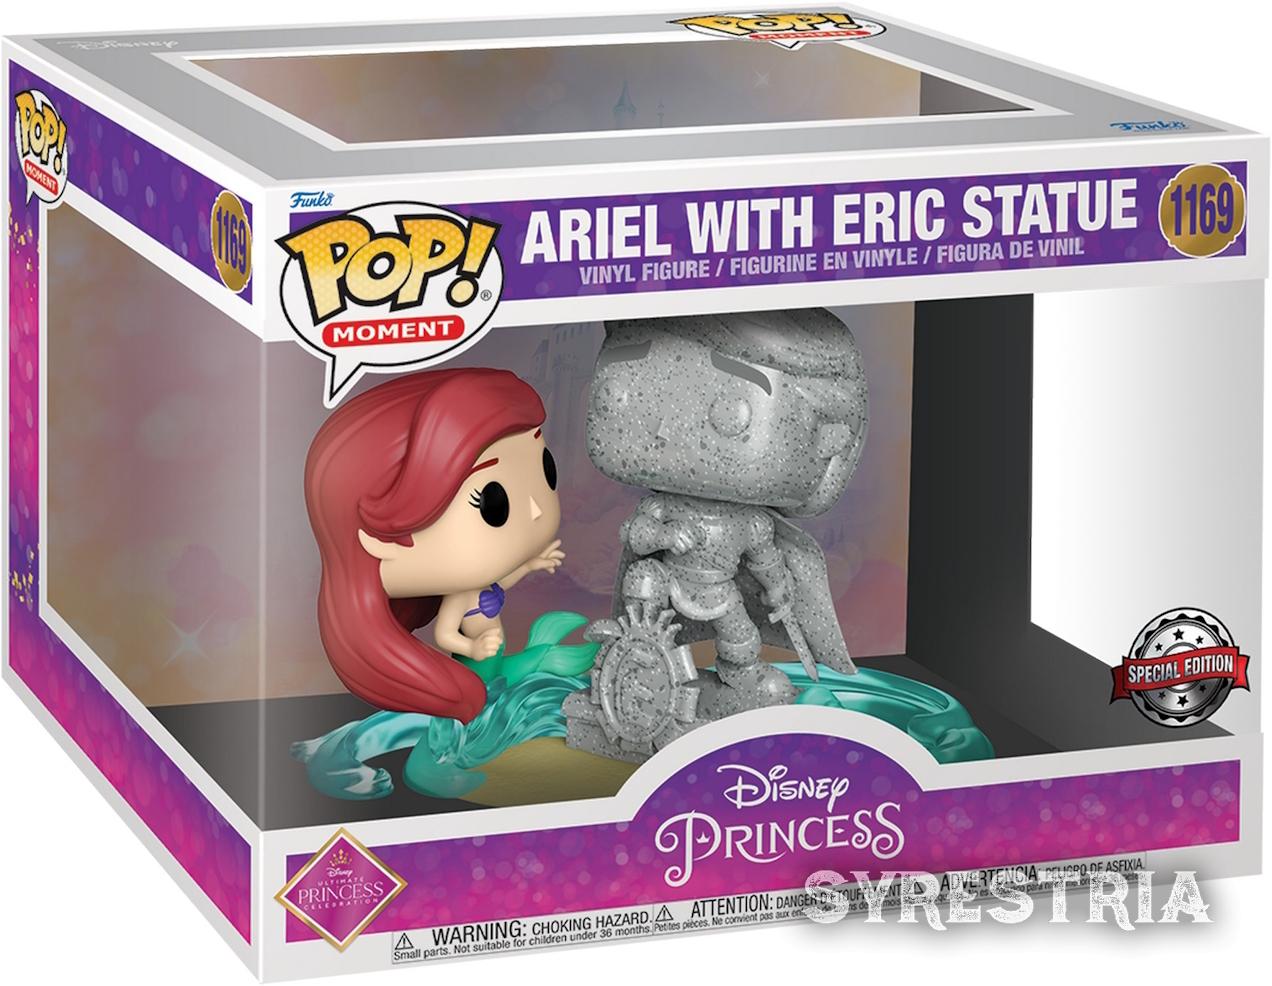 Disney Princess - Ariel With Eric Statue 1169 Special Edition - Funko Moments Pop!